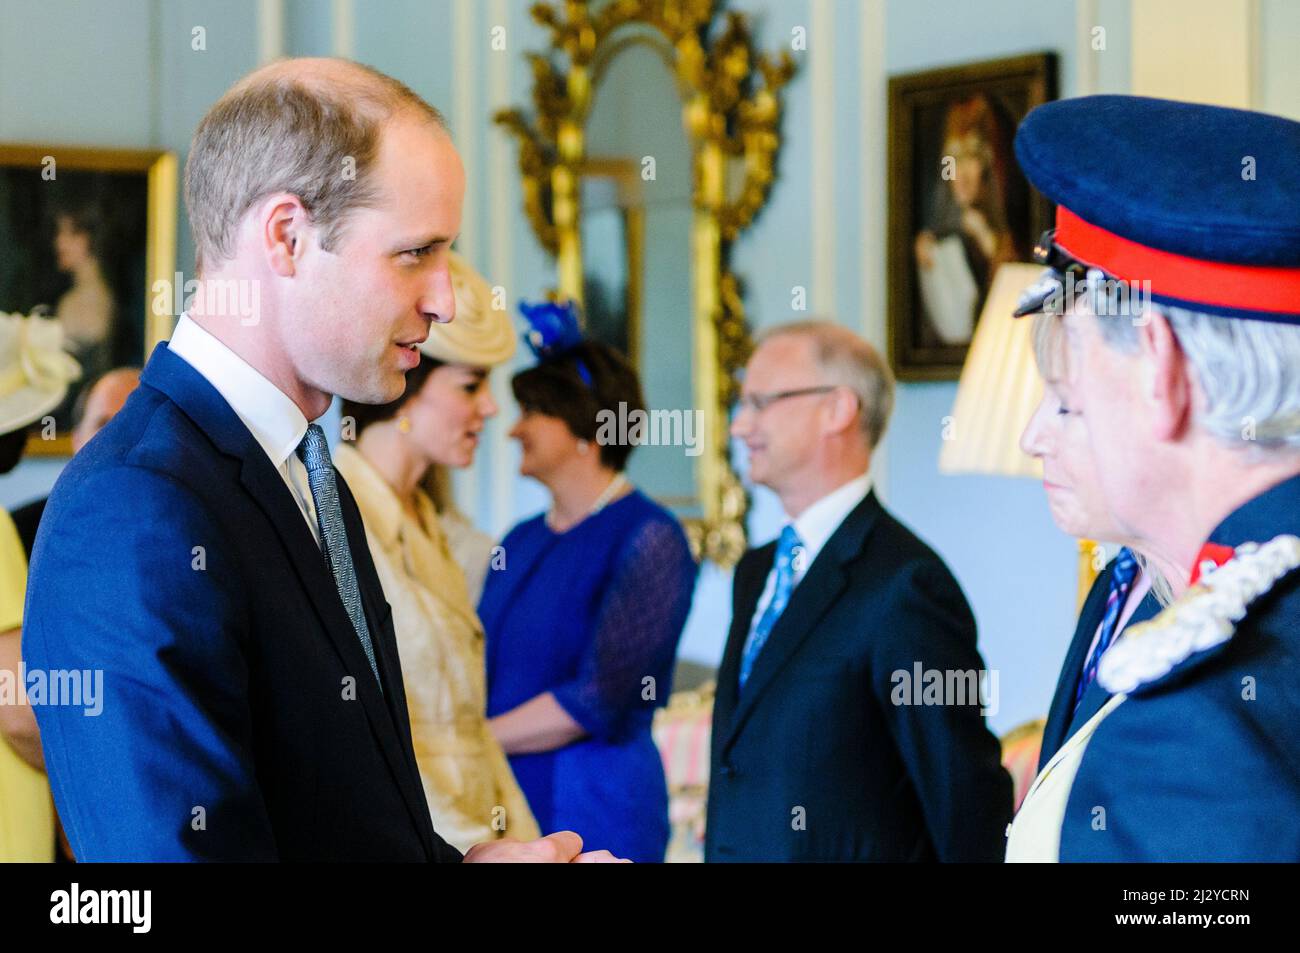 HILLSBOROUGH, NORTHERN IRELAND. 14 JUN 2016: Prince William, The Duke of Cambridge meets guests as he arrives at the Secretary of State's annual garden party with Catherine (Kate) the Duchess of Cambridge. Stock Photo